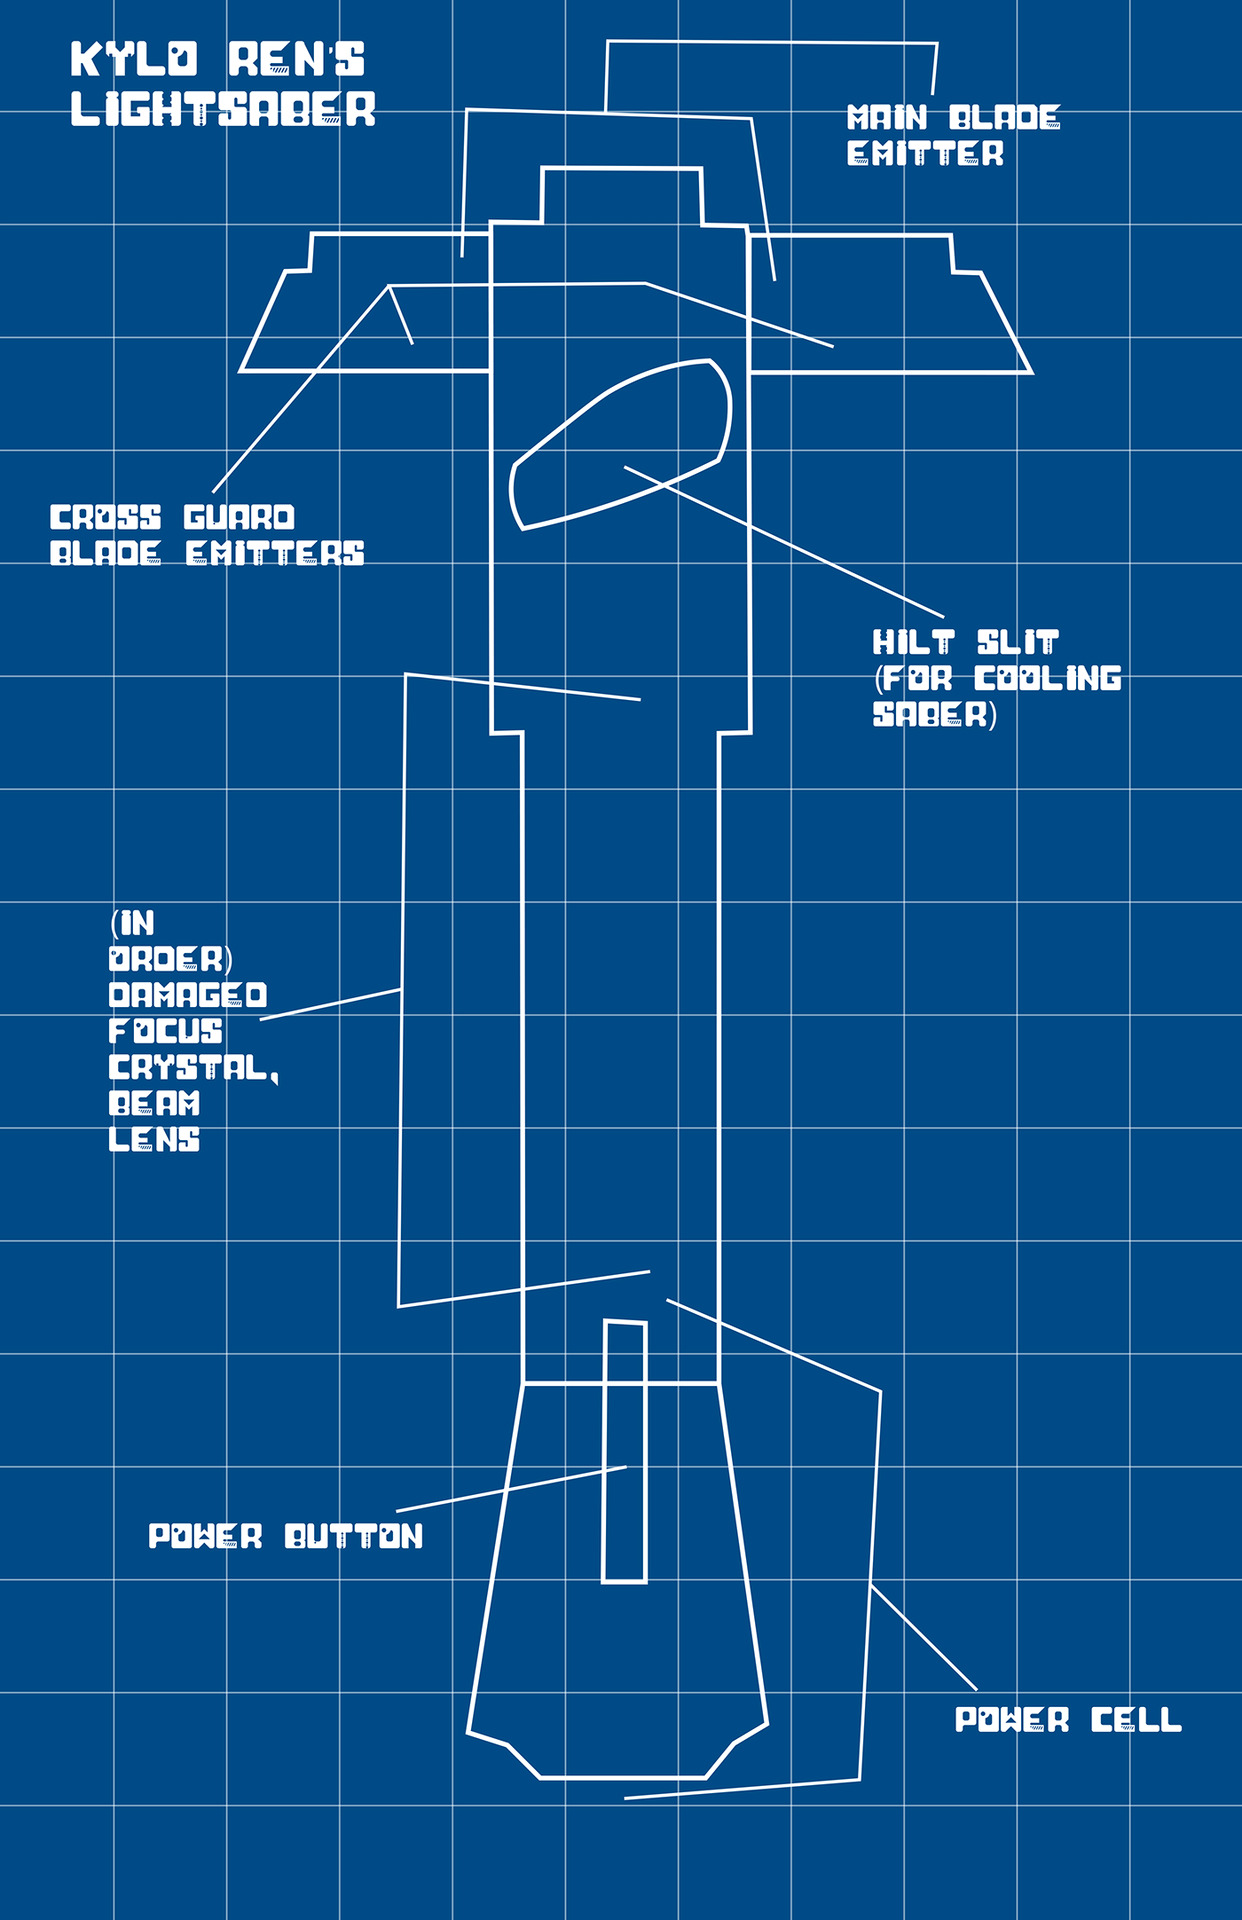 TieFighters Lightsaber  Blueprints  Series by Trent Scioneaux